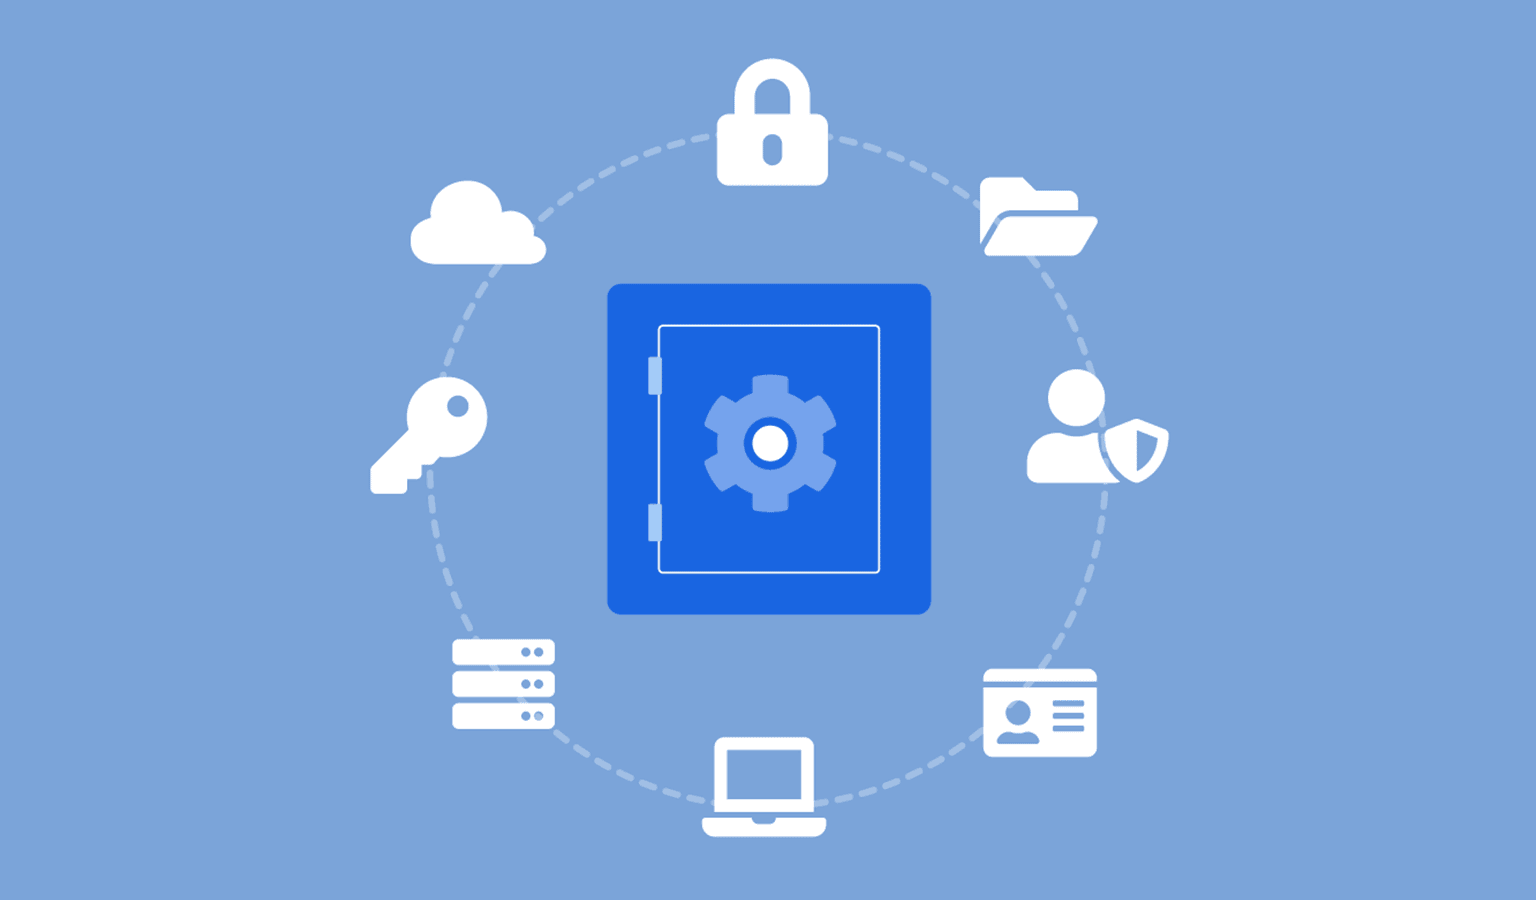 Light blue background with dark blue safe in the middle surrounded by white icons, padlock, cloud, key, server, files, computer